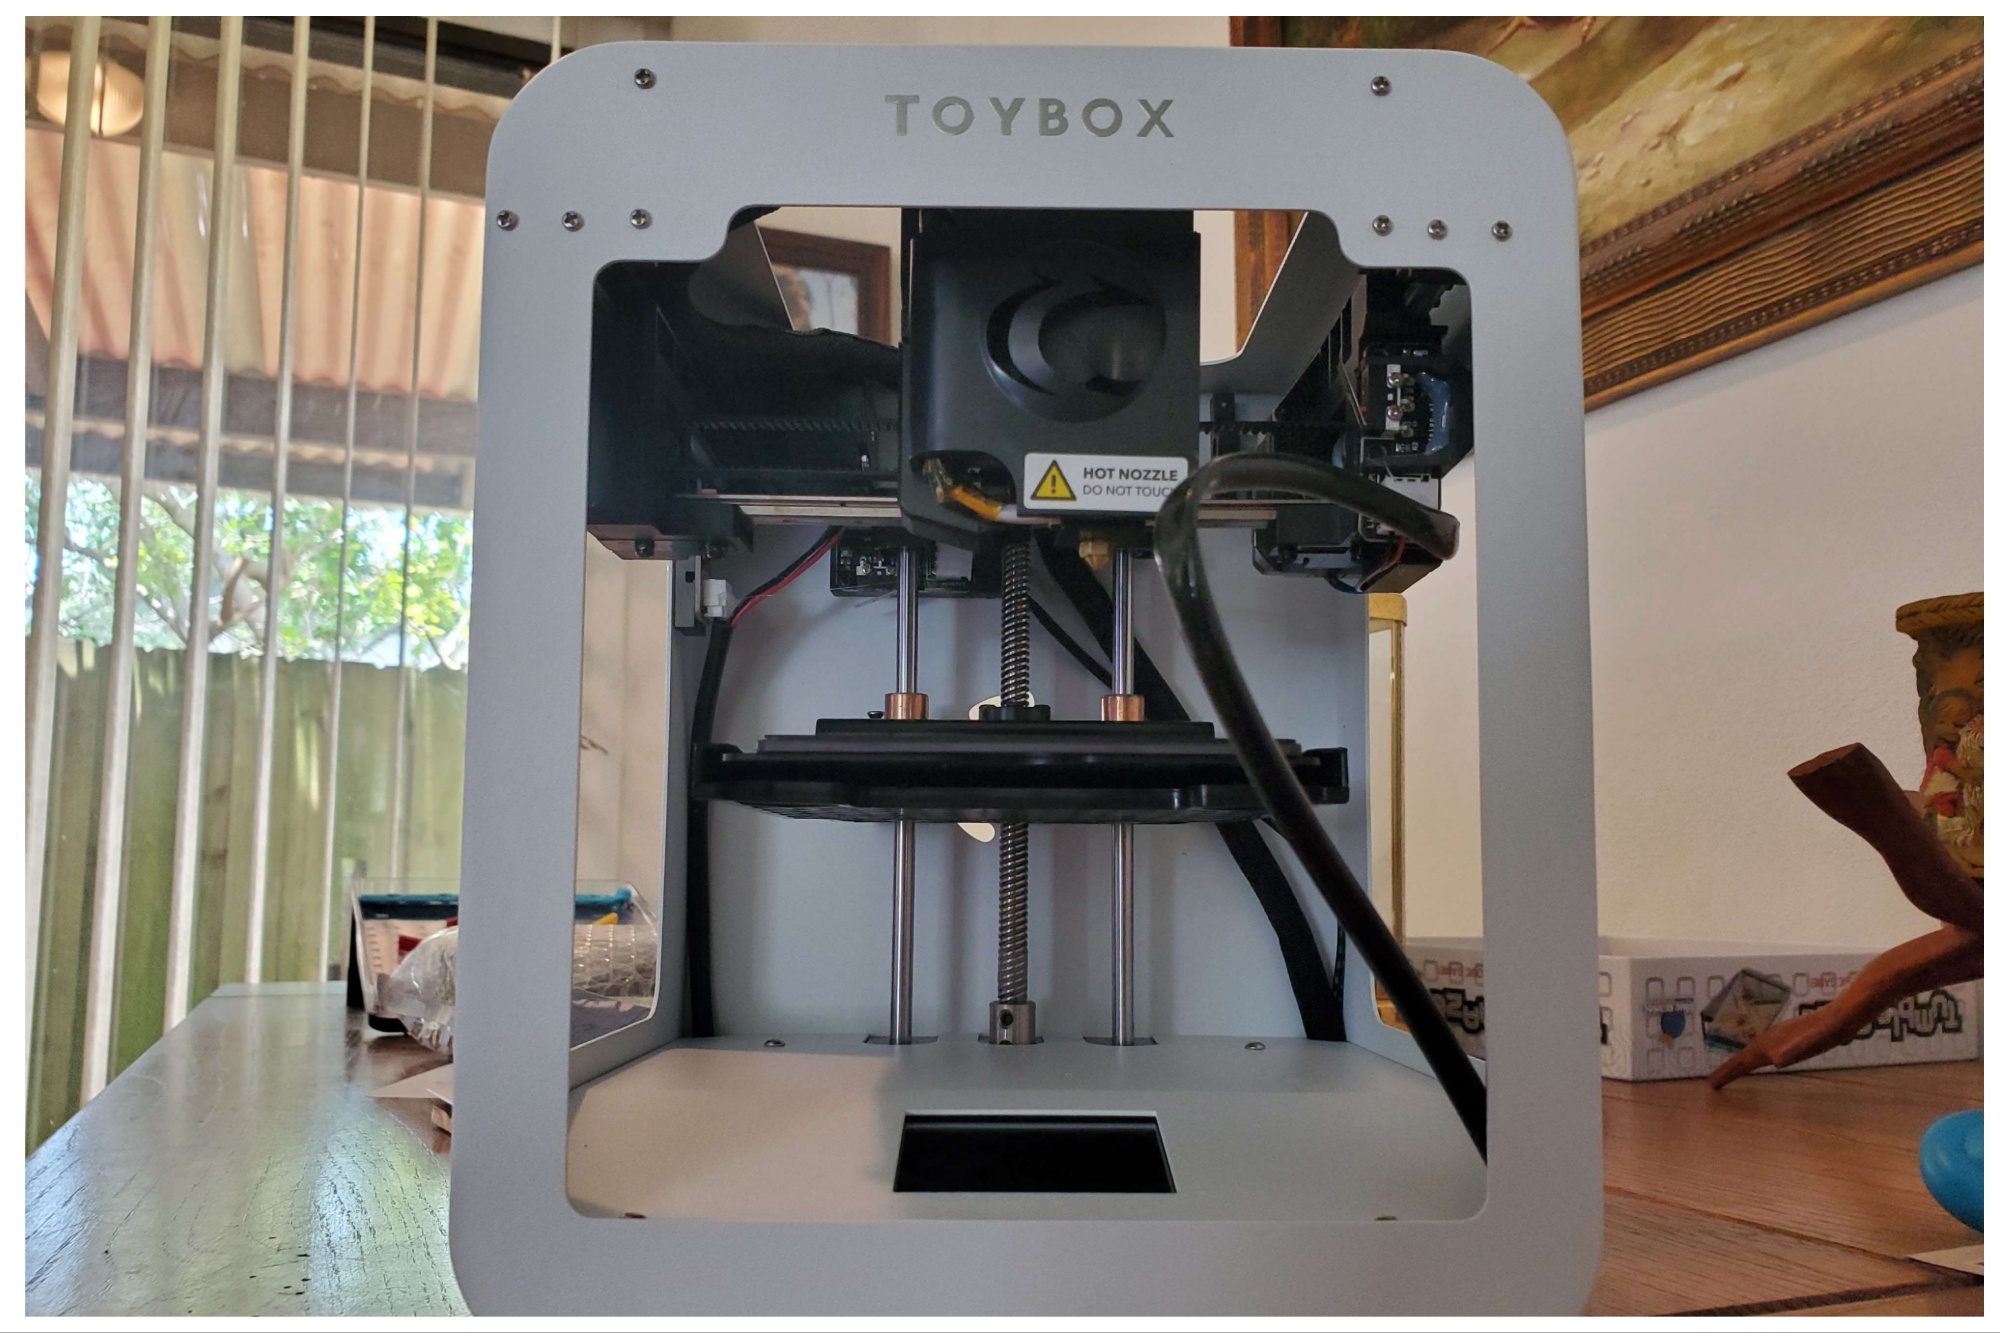 Toybox 3D printer set up on a table